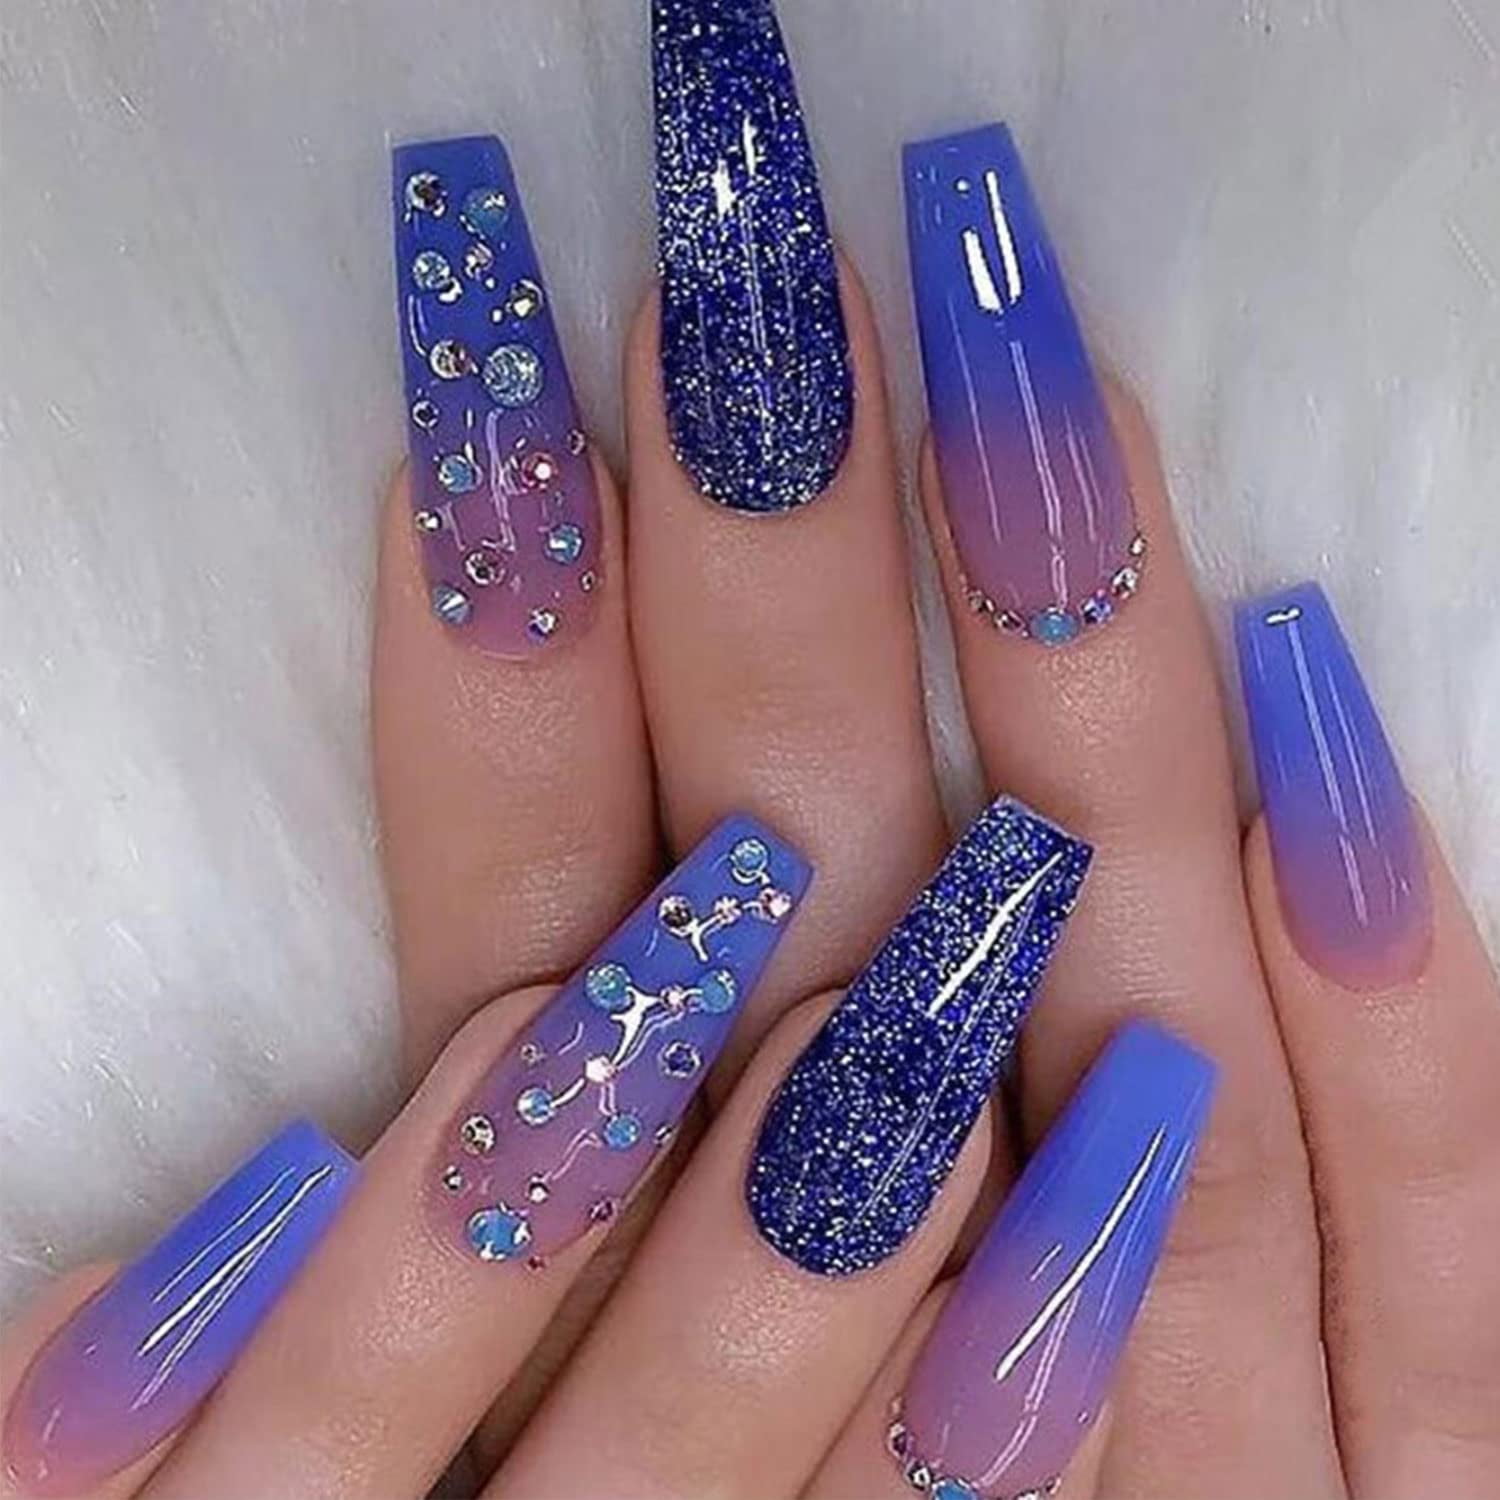 Glitter Royal Blue Coffin Nails: The Trendy Design & How-To Guide